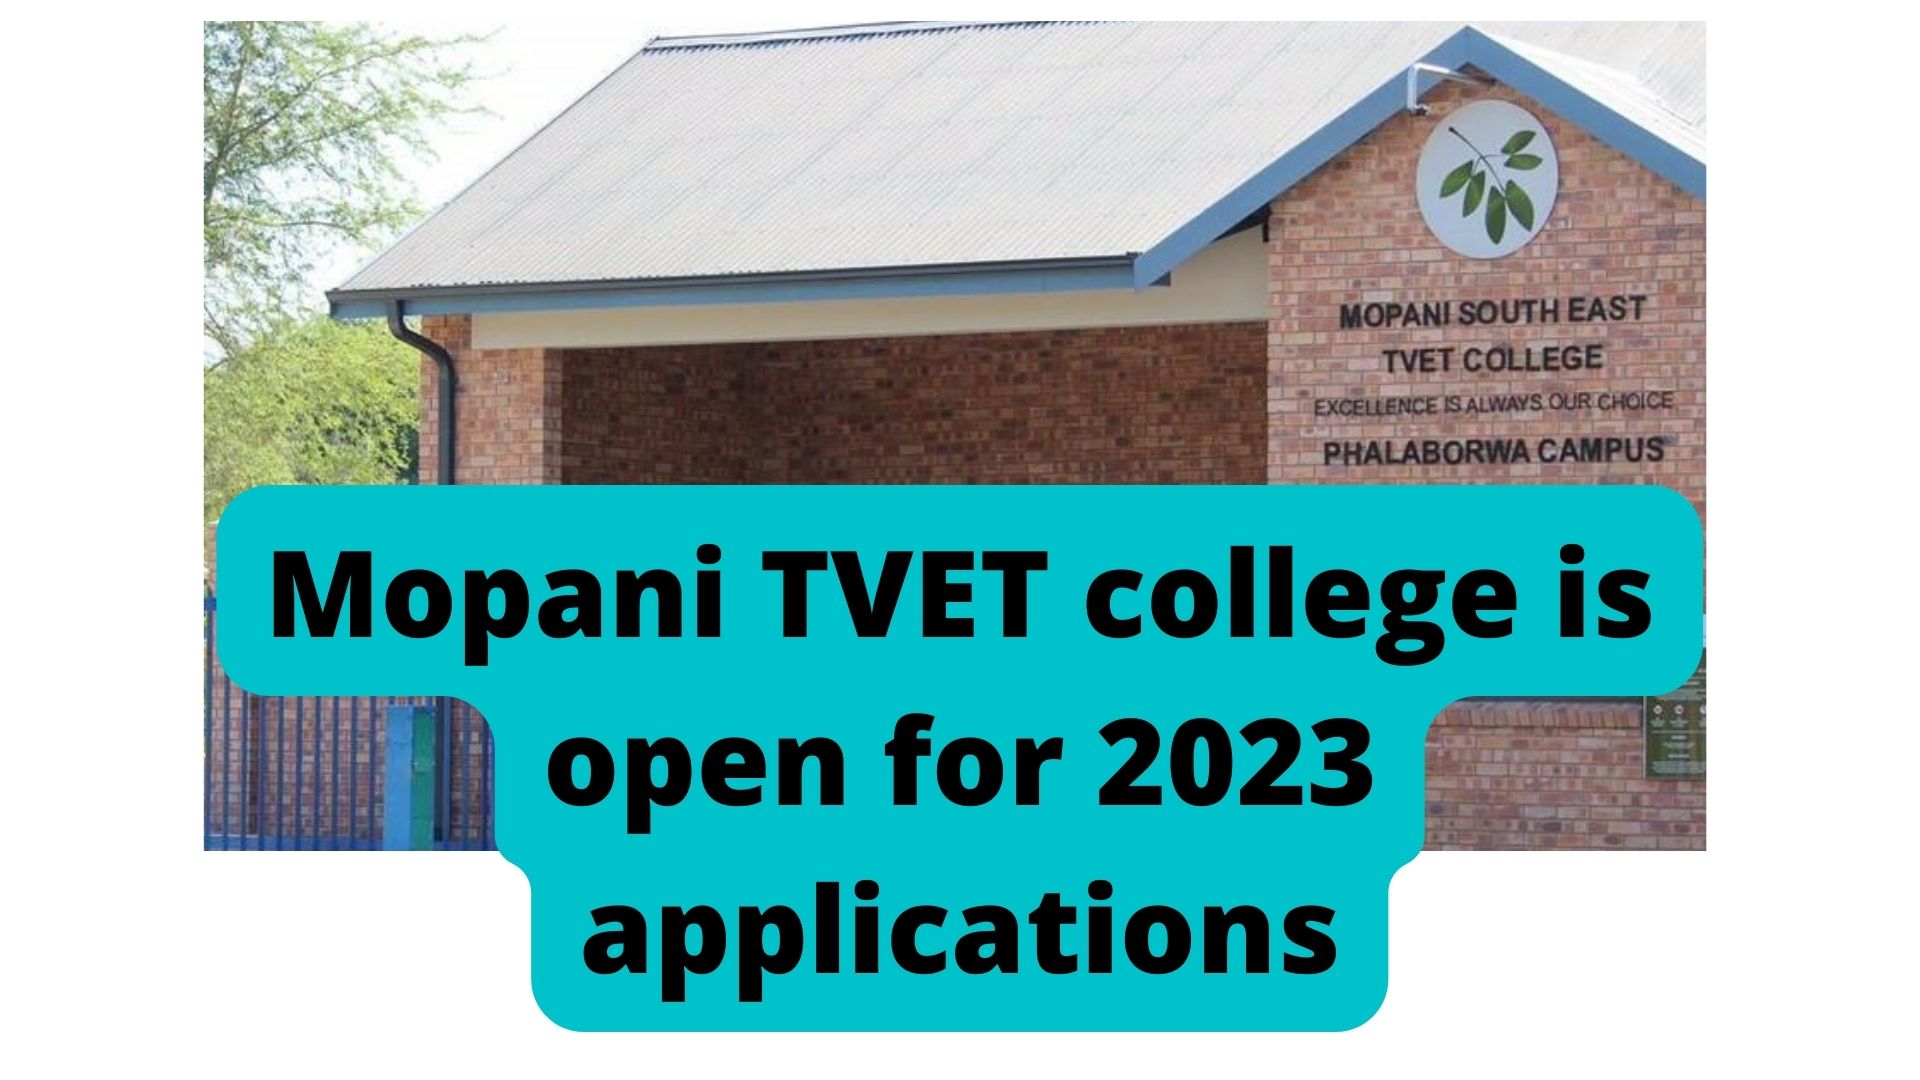 Mopani TVET college is open for 2023 applications